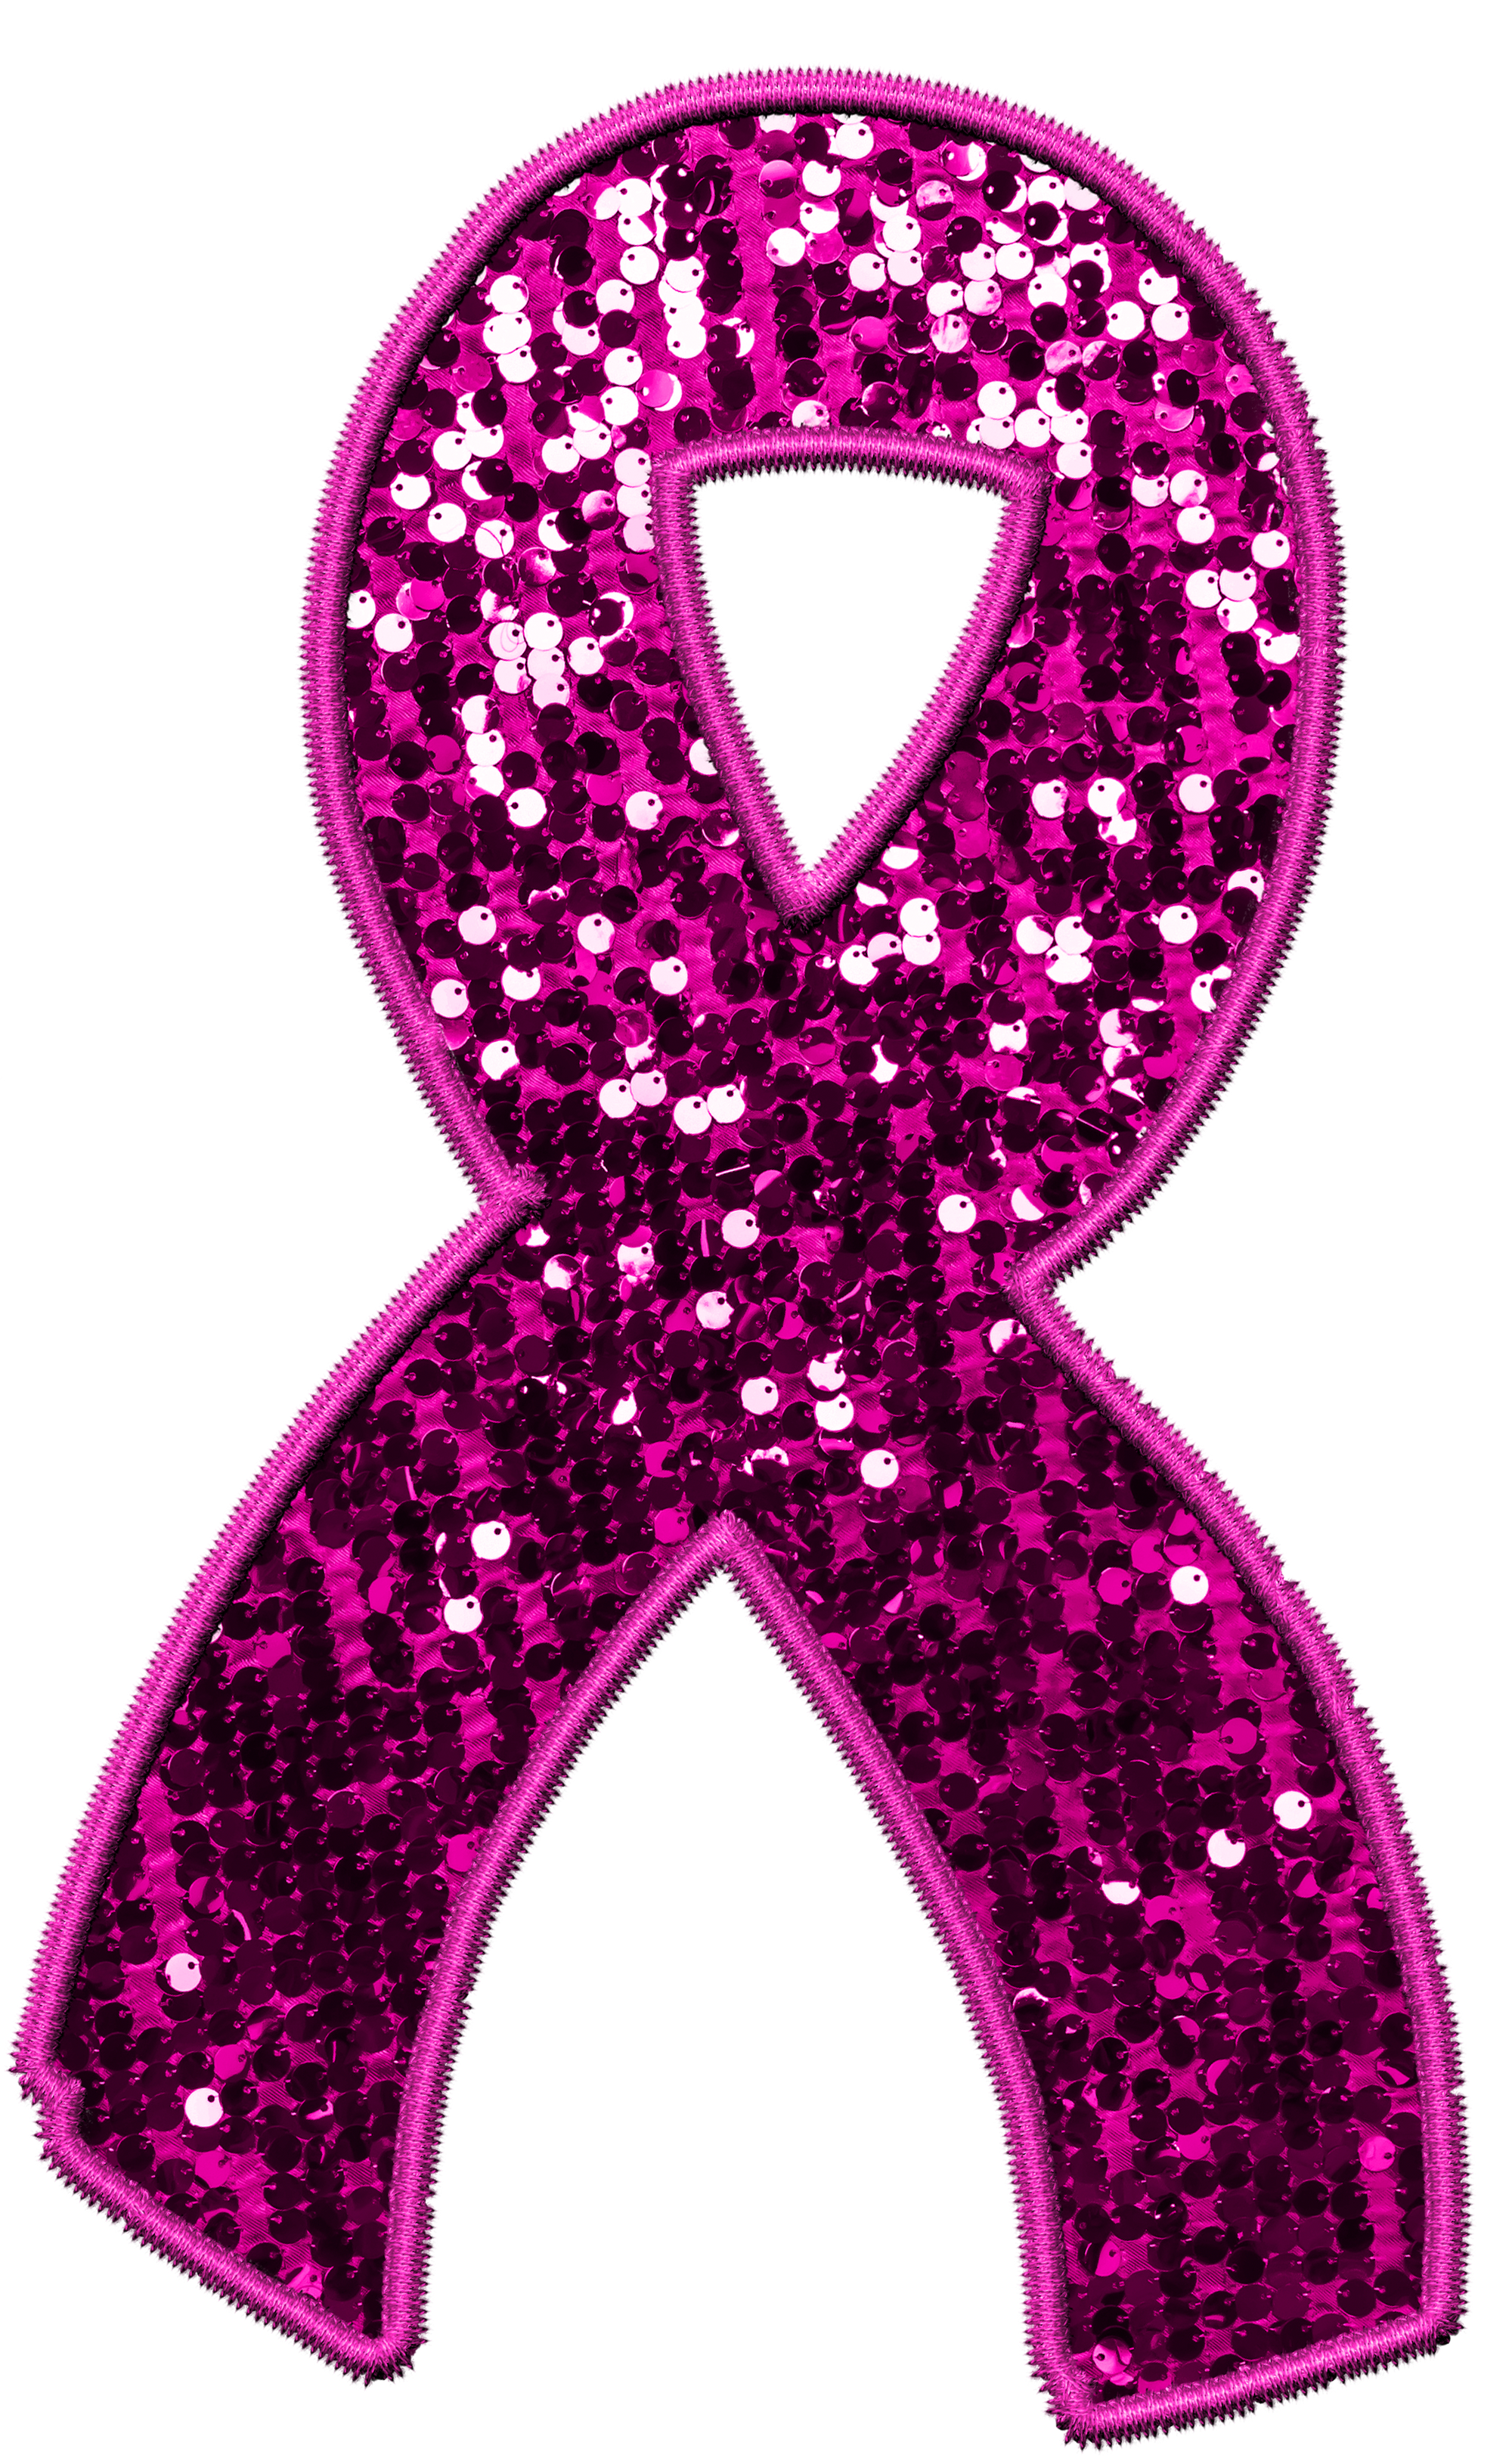 BREAST CANCER AWARENESS - PINK OUT